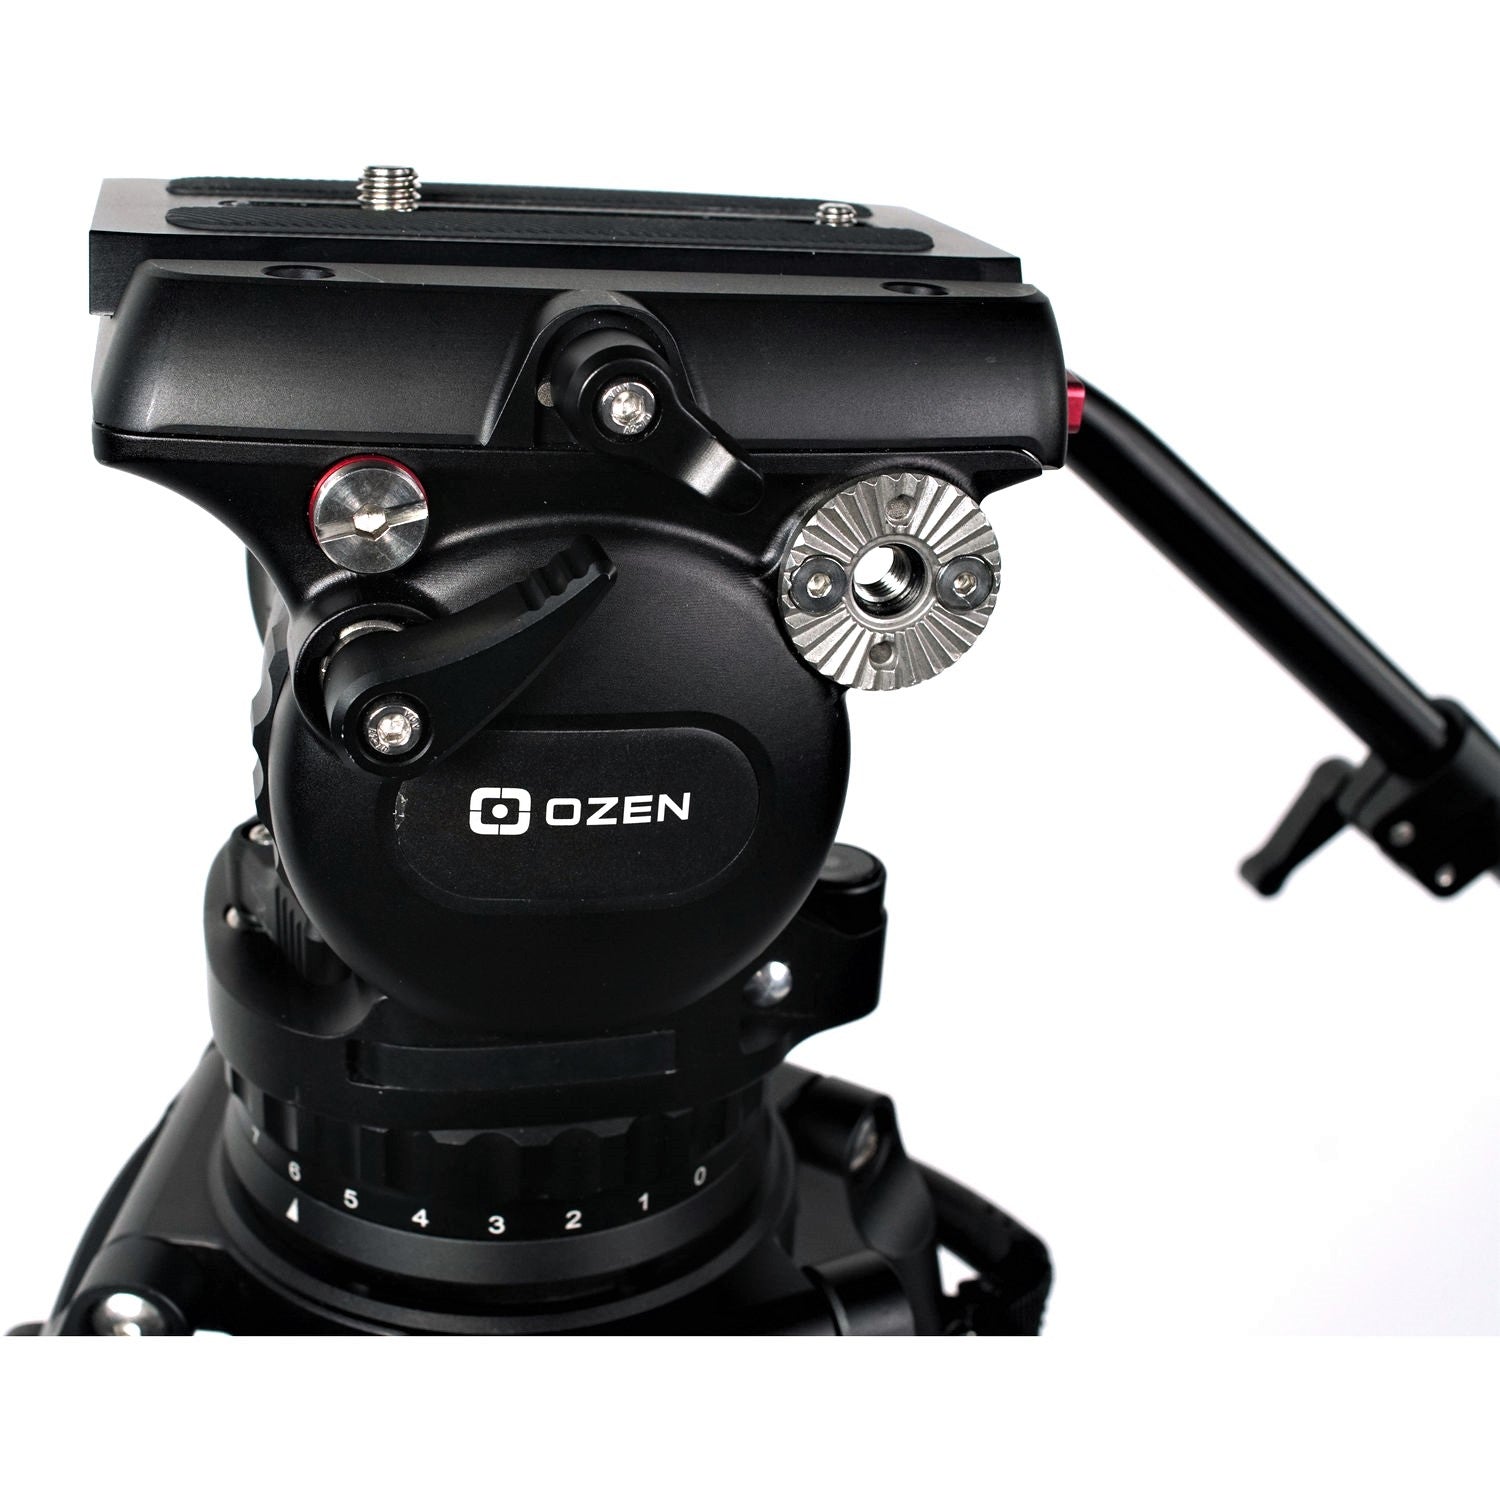 OZEN Agile 15S Fluid Head in a Front Close-Up View